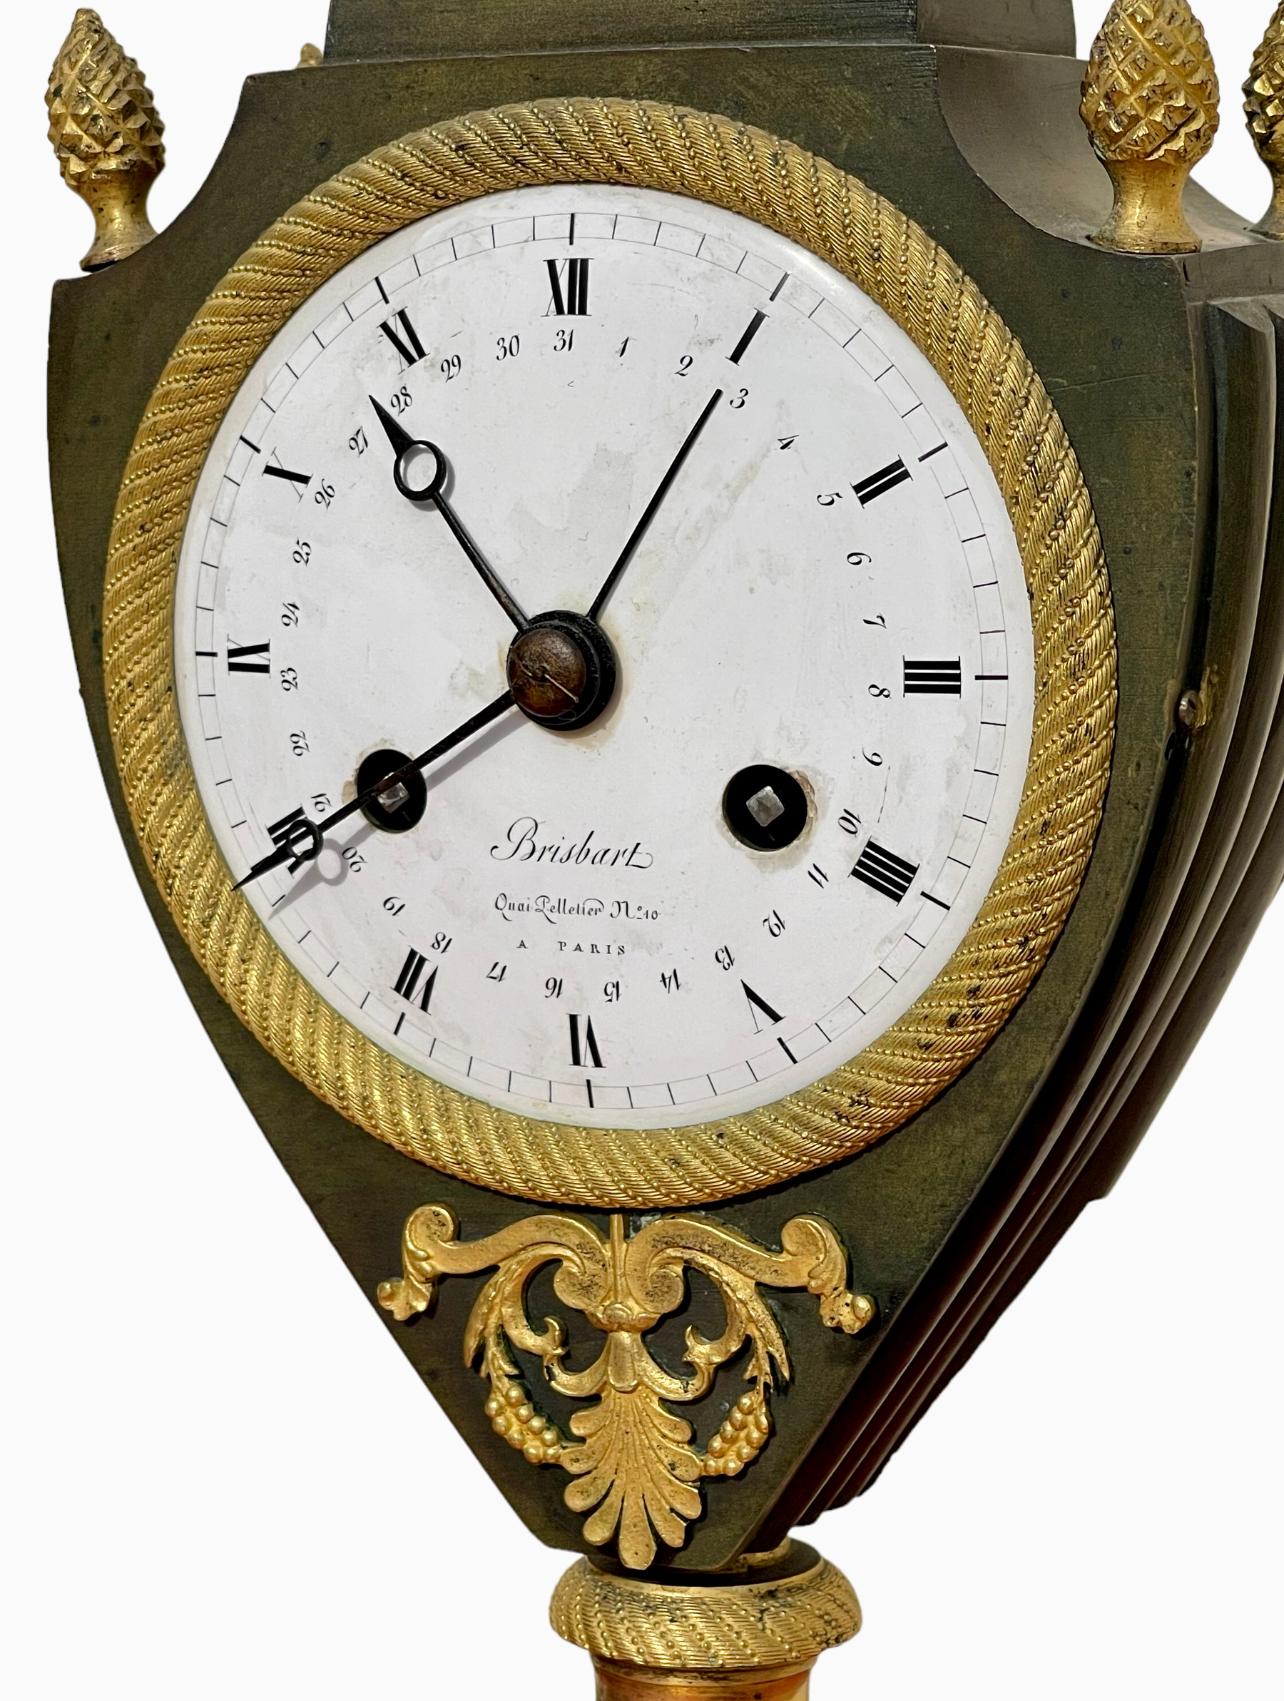 French Brisbart In Paris - Empire Period Clock  For Sale